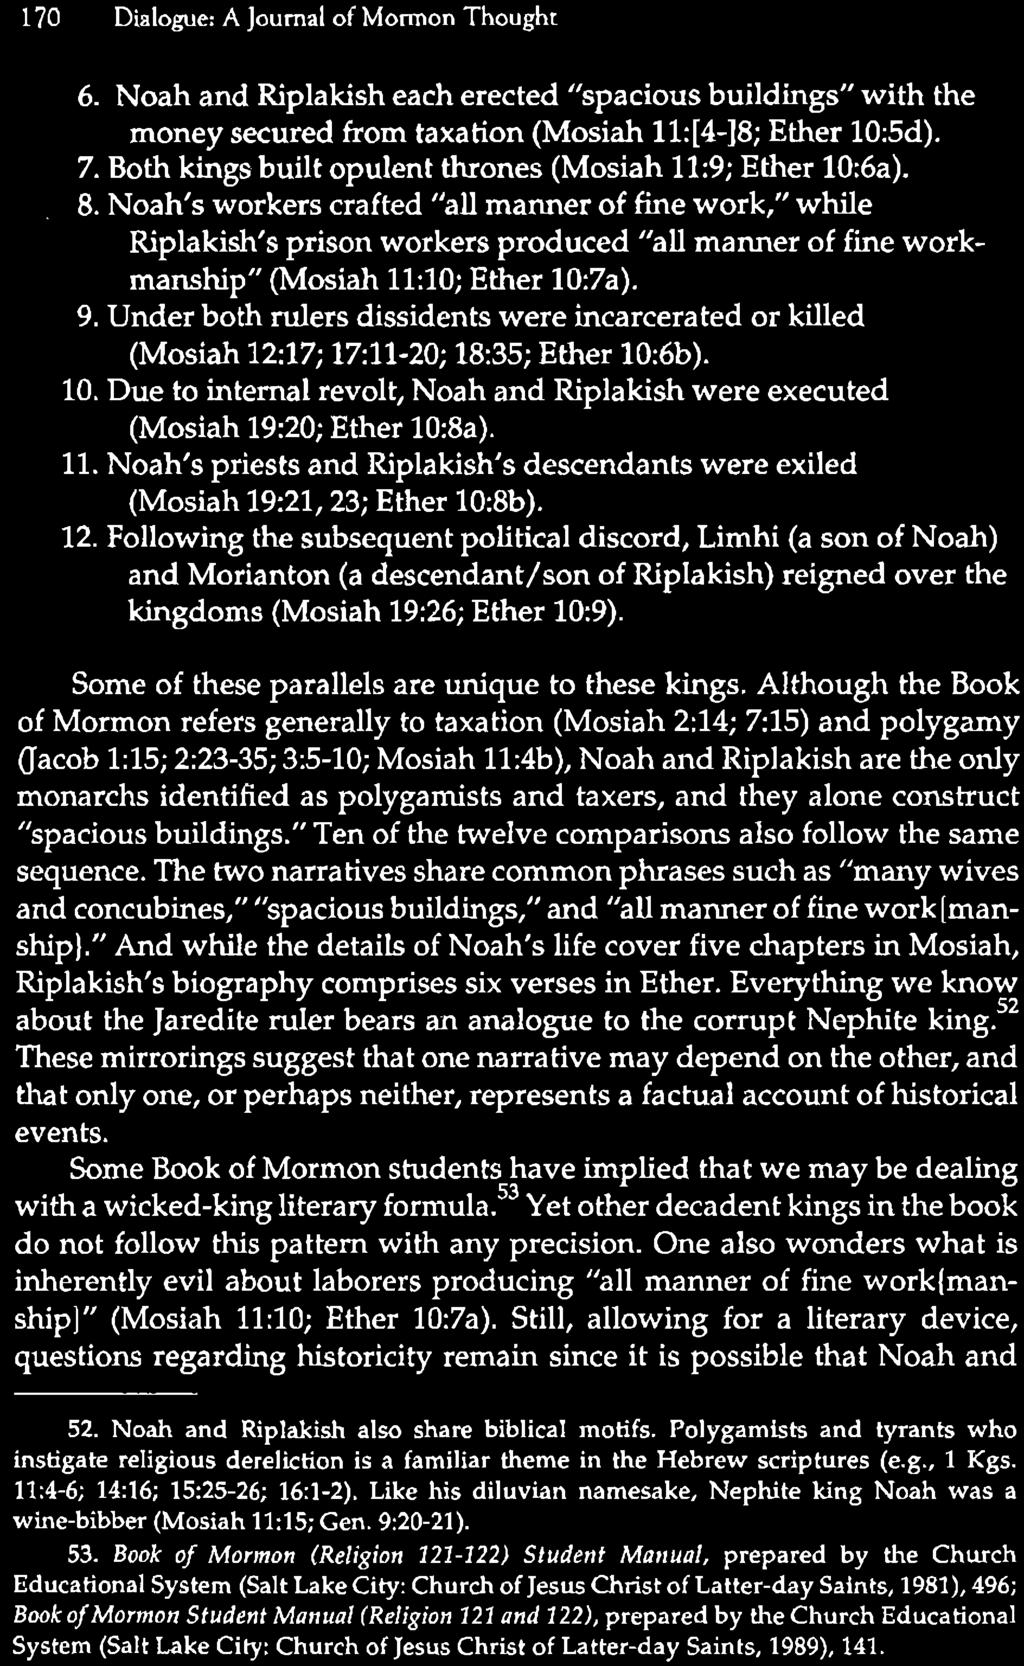 Noah's priests and Riplakish's descendants were exiled (Mosiah 19:21,23; Ether 10:8b). 12.